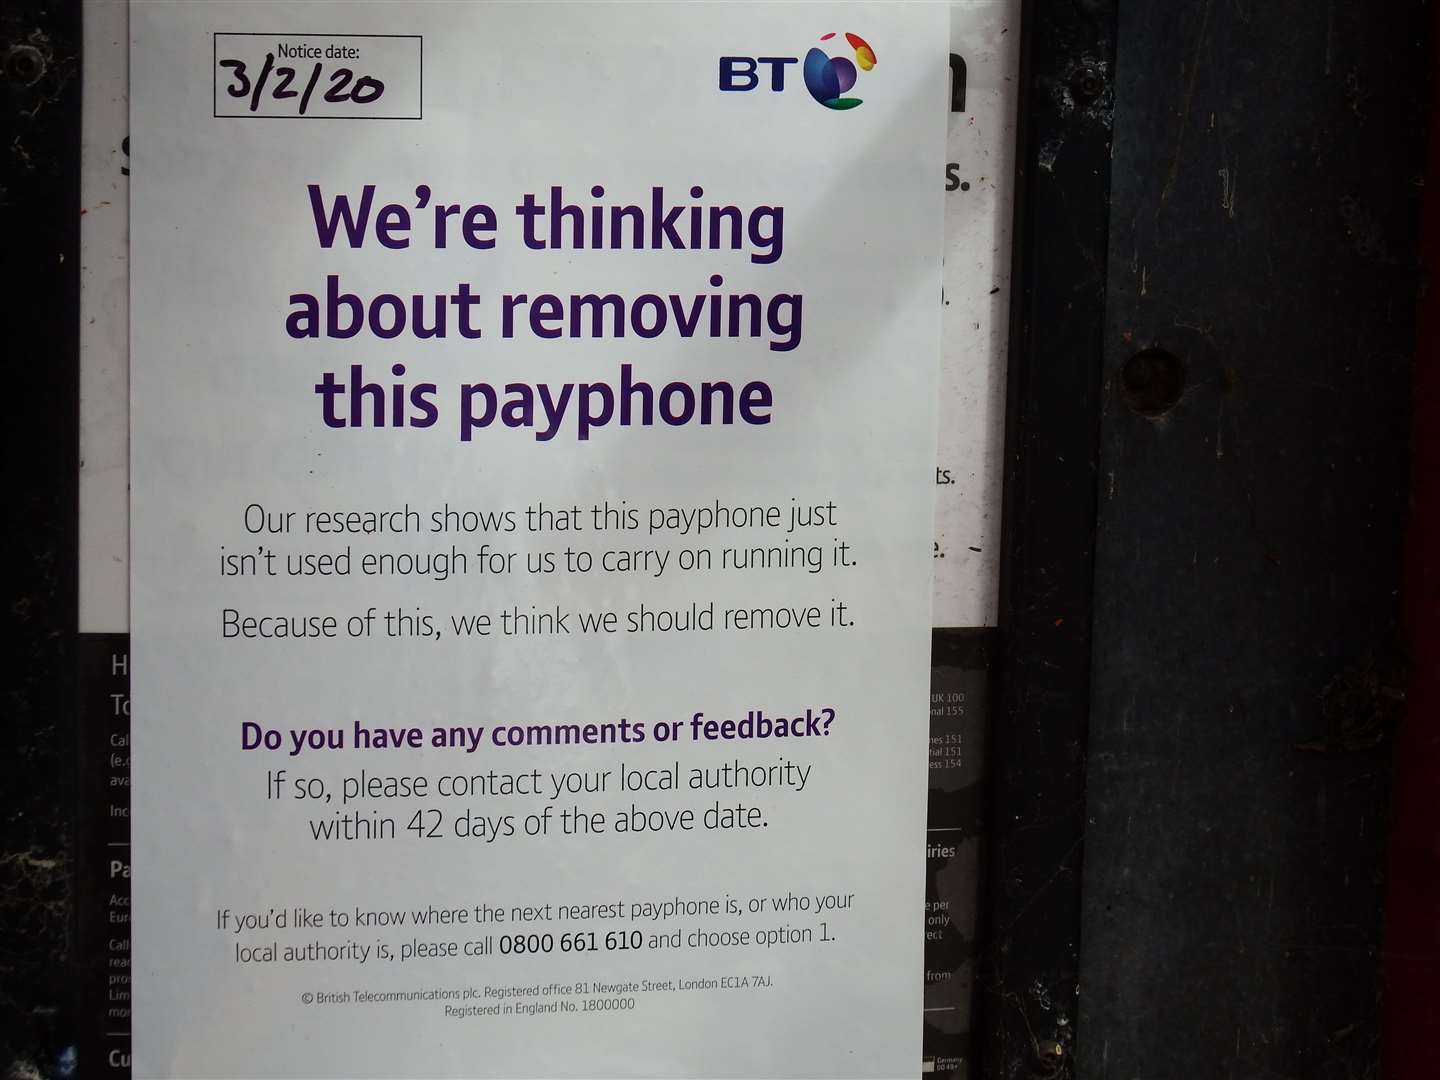 BT are asking for feedback about the removal of the phone